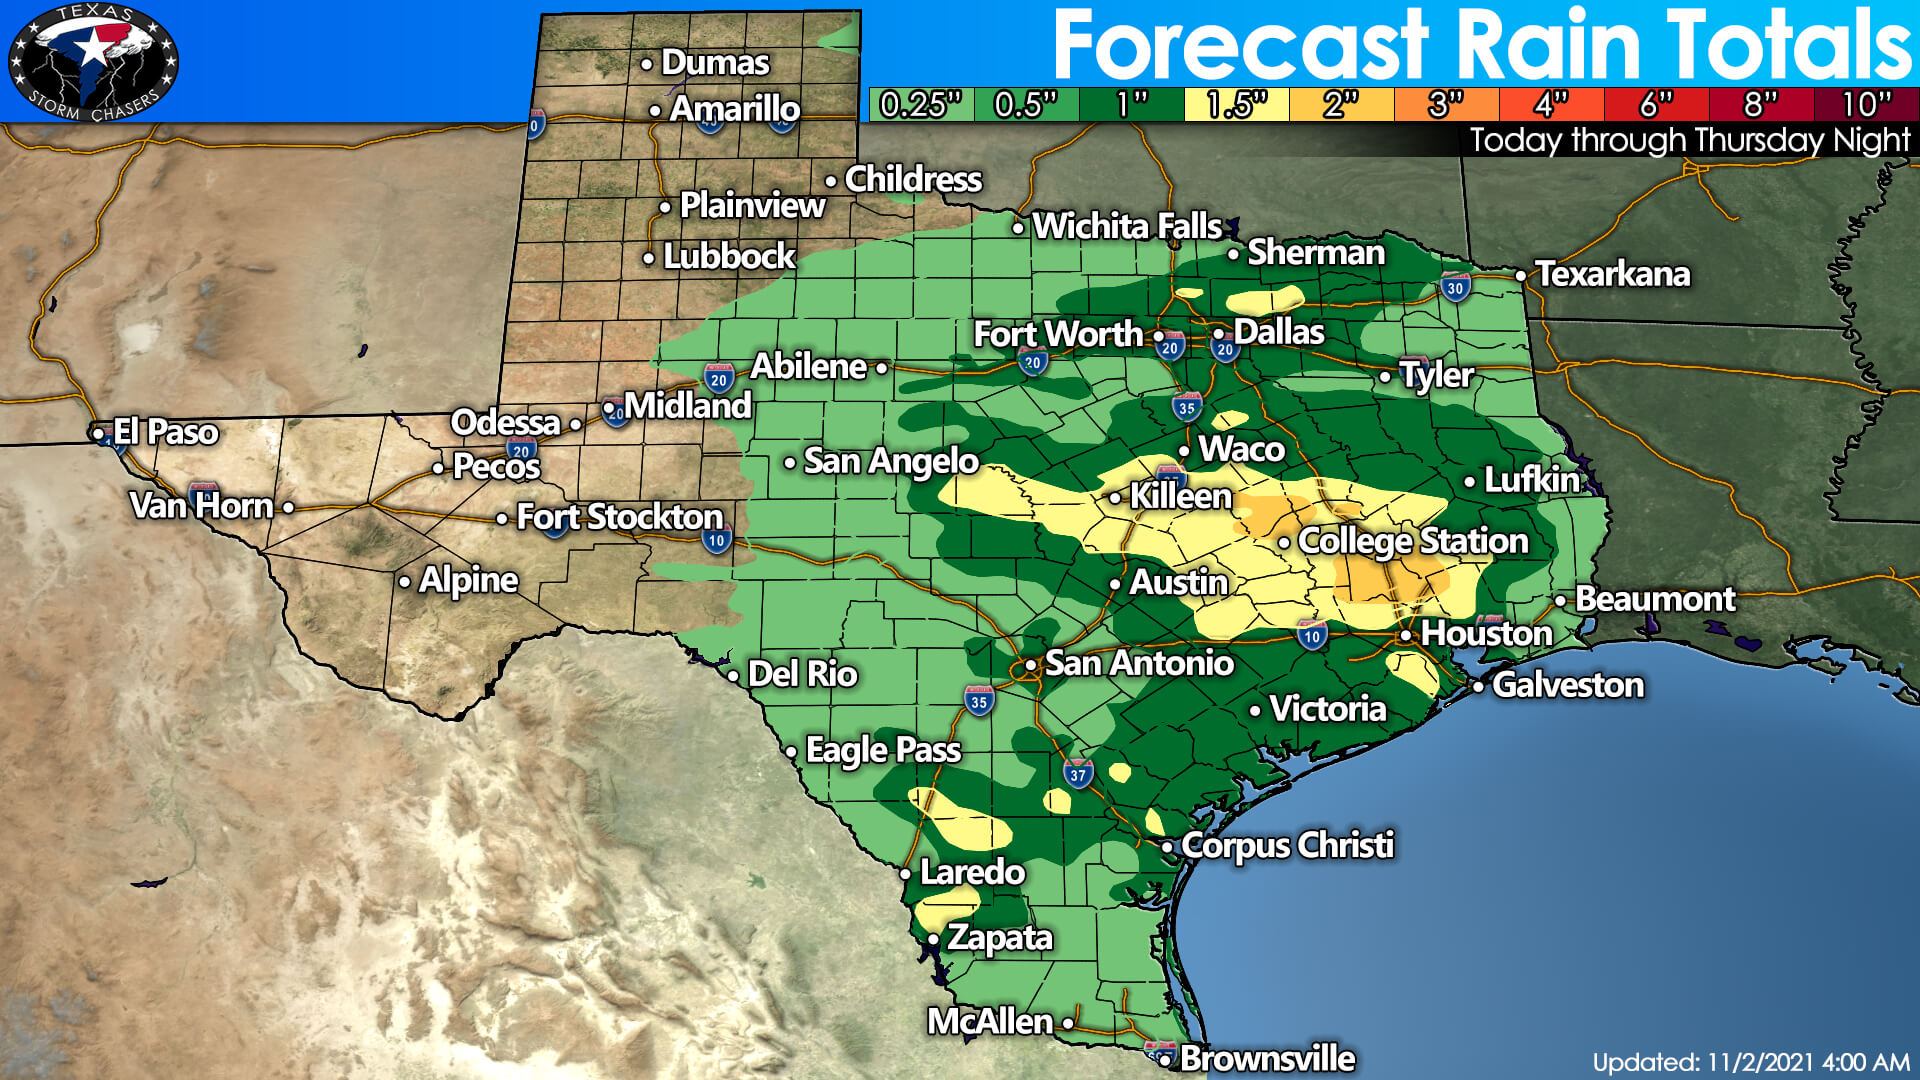 Between one-quarter and one and a half inches of rain may fall between Today and Thursday across the eastern two-thirds of Texas. The heaviest rains are expected from North Texas south through the Brazos Valley, Coastal Plains, and Southeast Texas. 